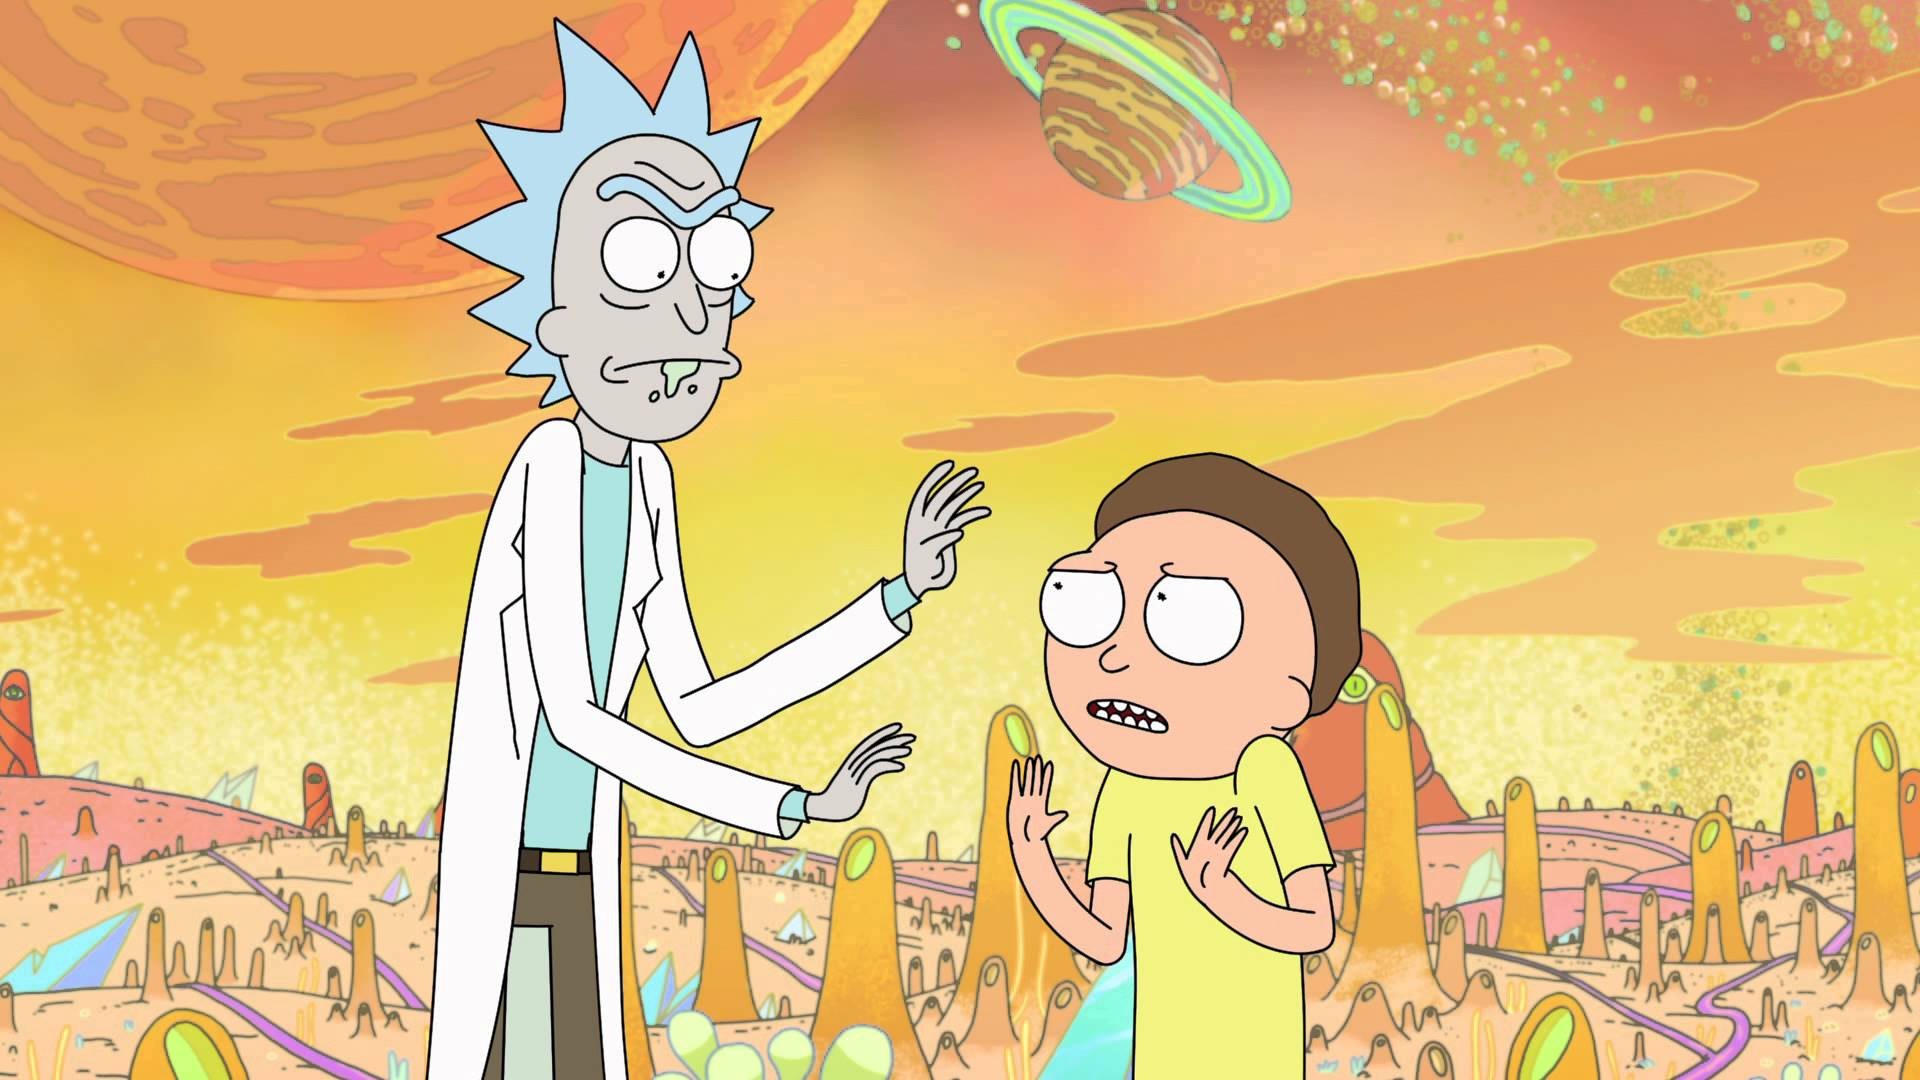 Rick n Morty Desktop Backgrounds HD with image resolution 1920x1080 pixel. You can use this wallpaper as background for your desktop Computer Screensavers, Android or iPhone smartphones